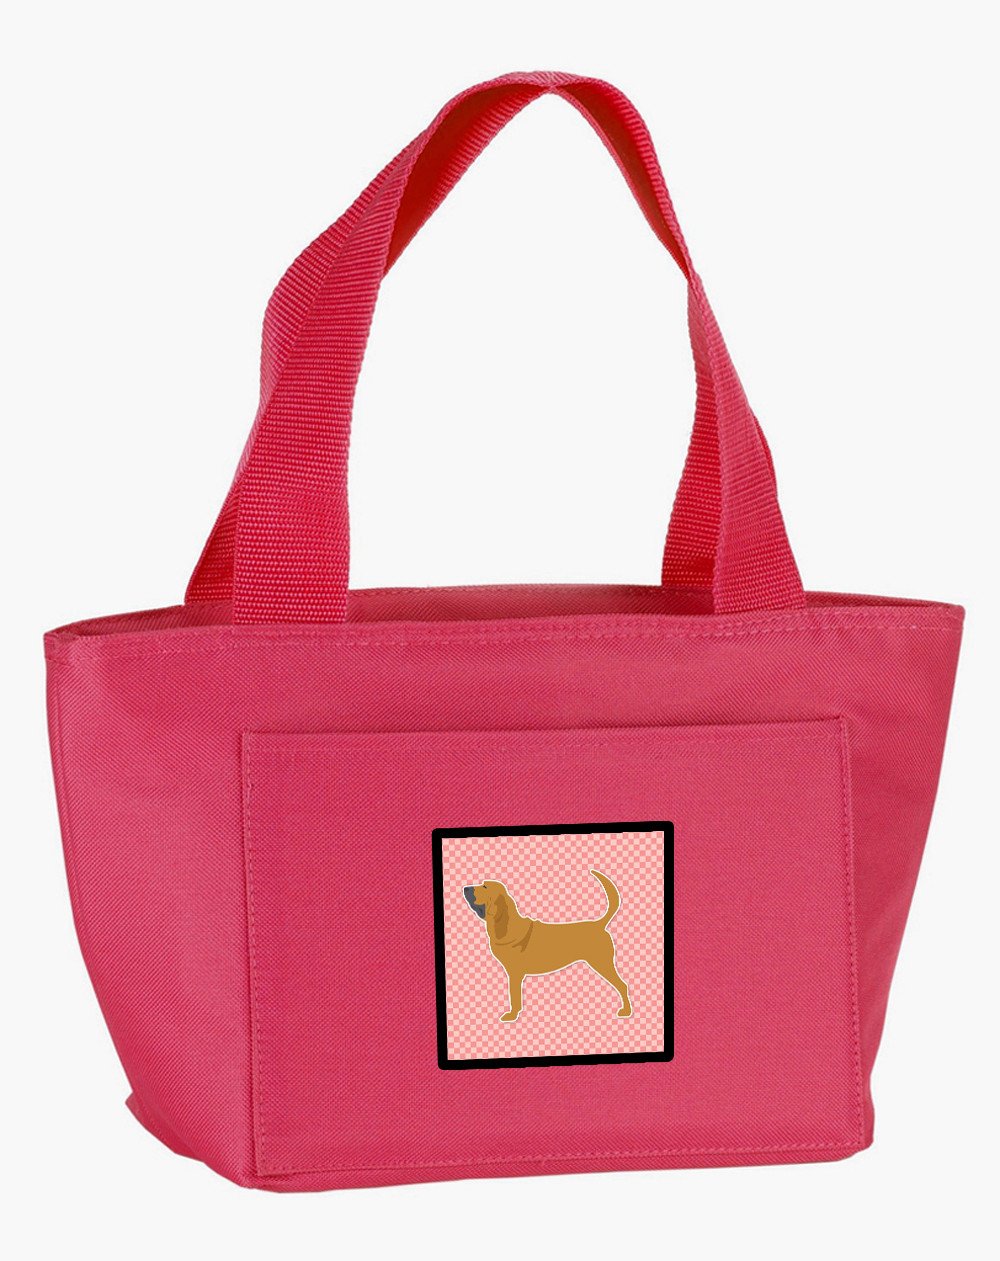 Bloodhound Checkerboard Pink Lunch Bag BB3584PK-8808 by Caroline's Treasures